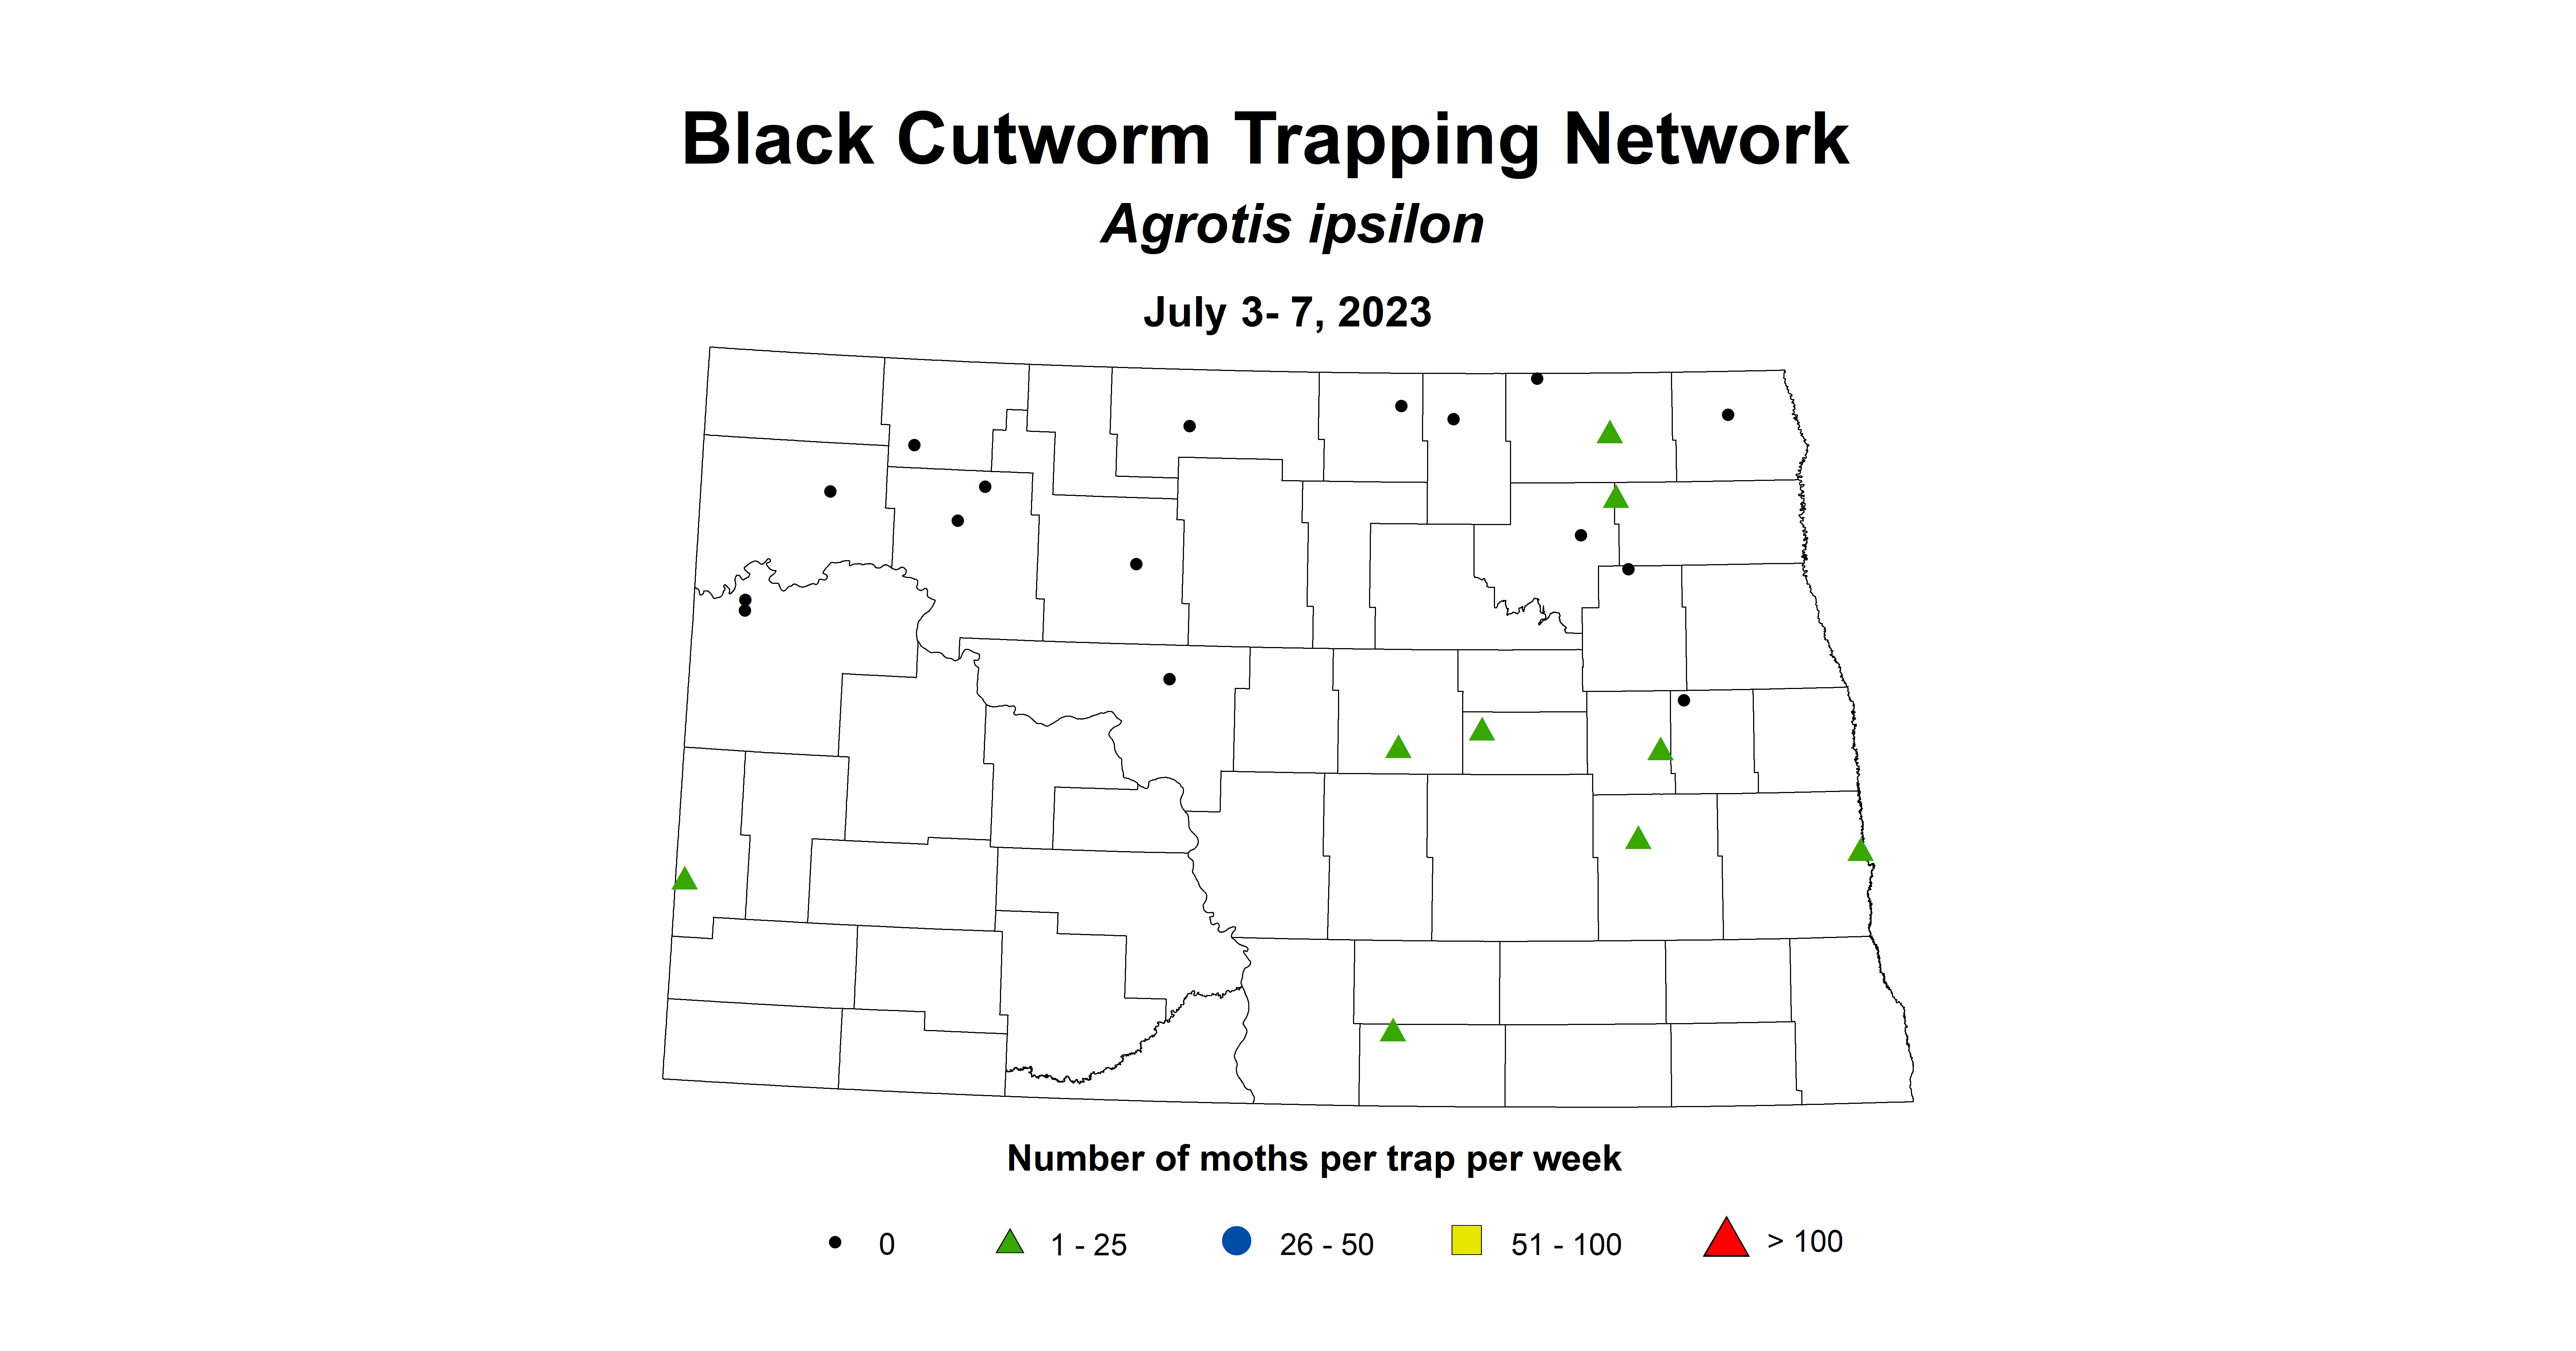 wheat insect trap black cutworm July 3-7 2023